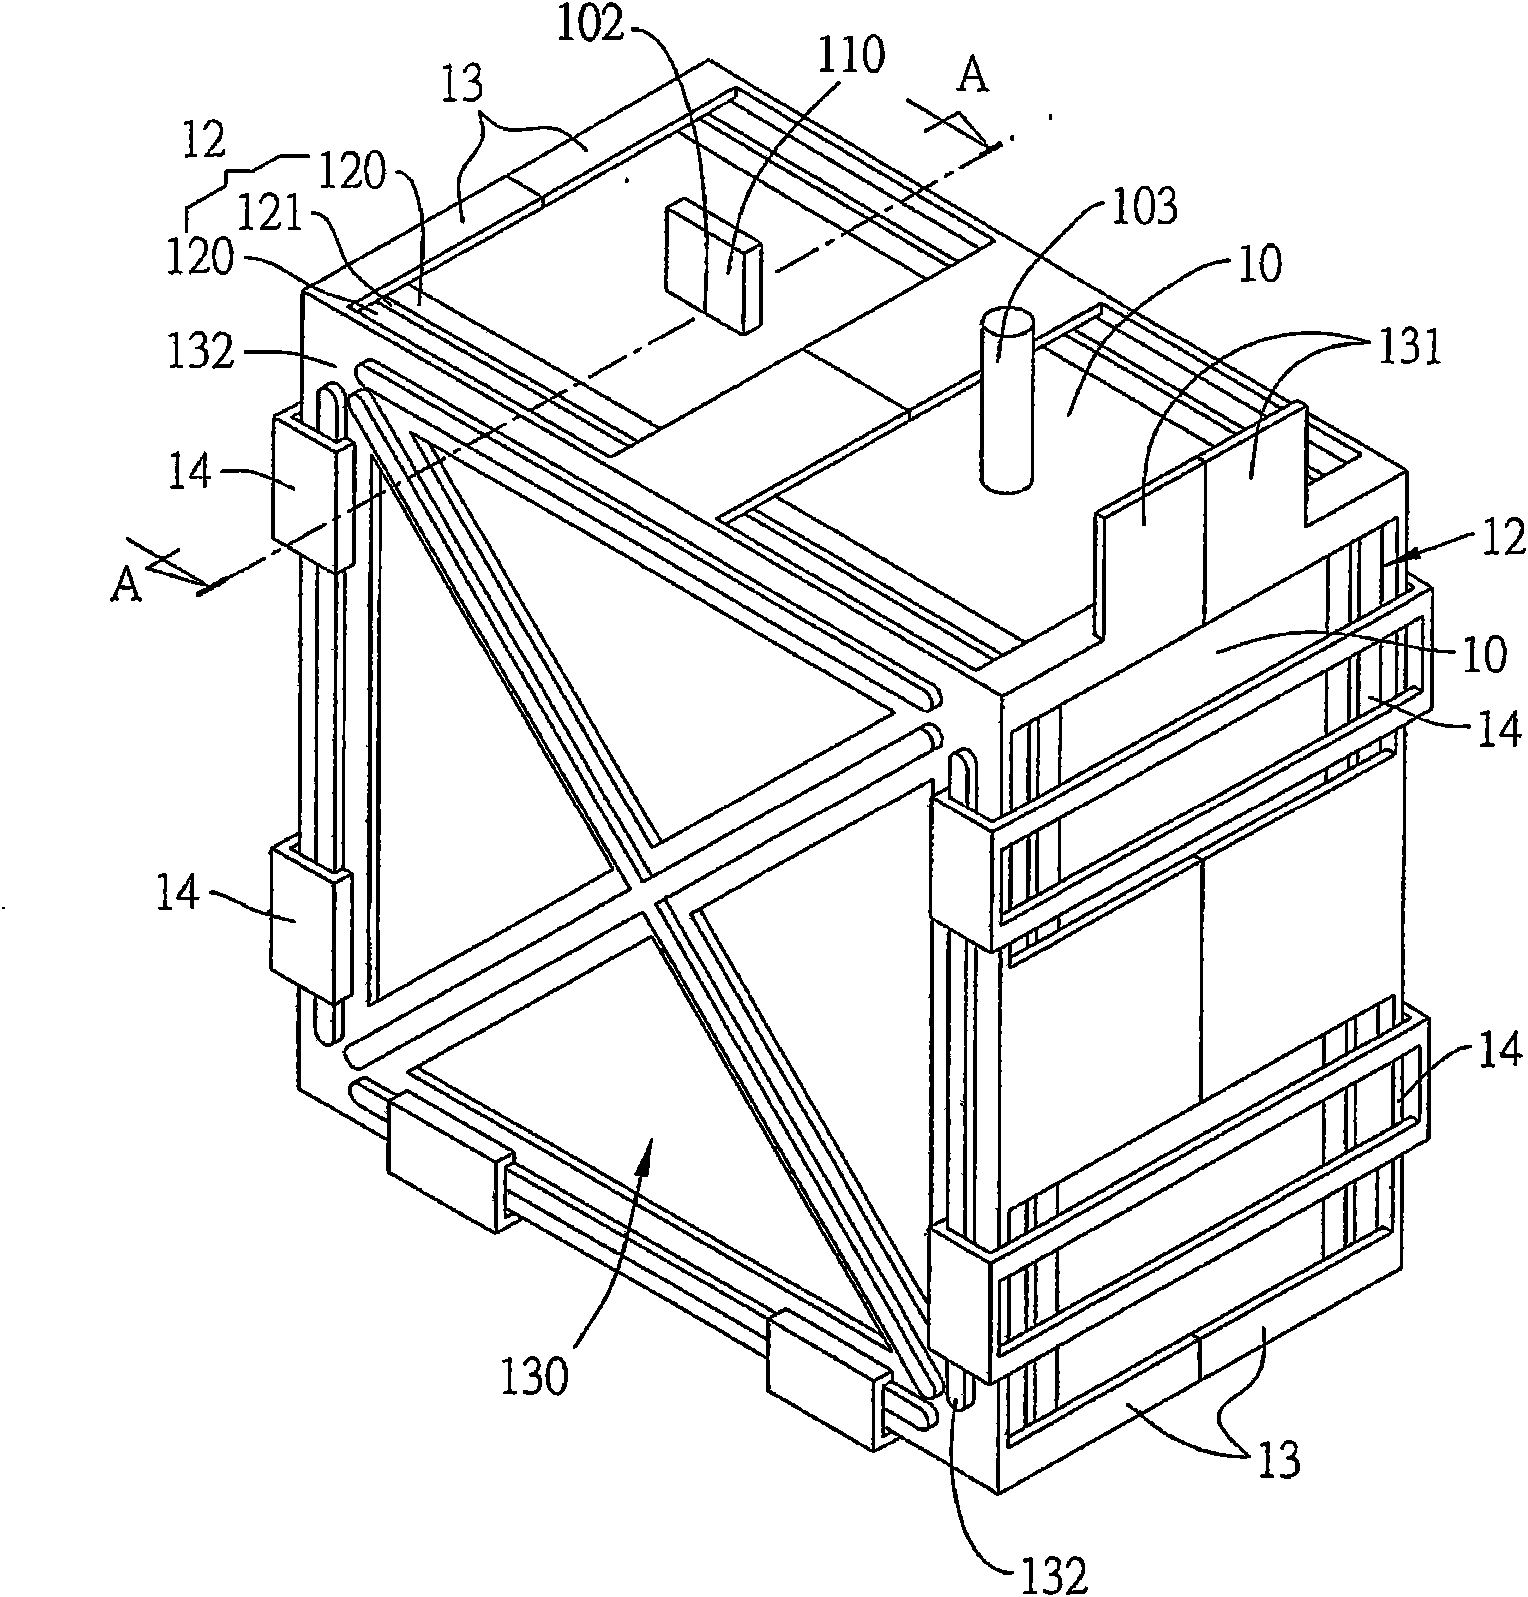 Battery device and packaging, dismounting and recovering method of same